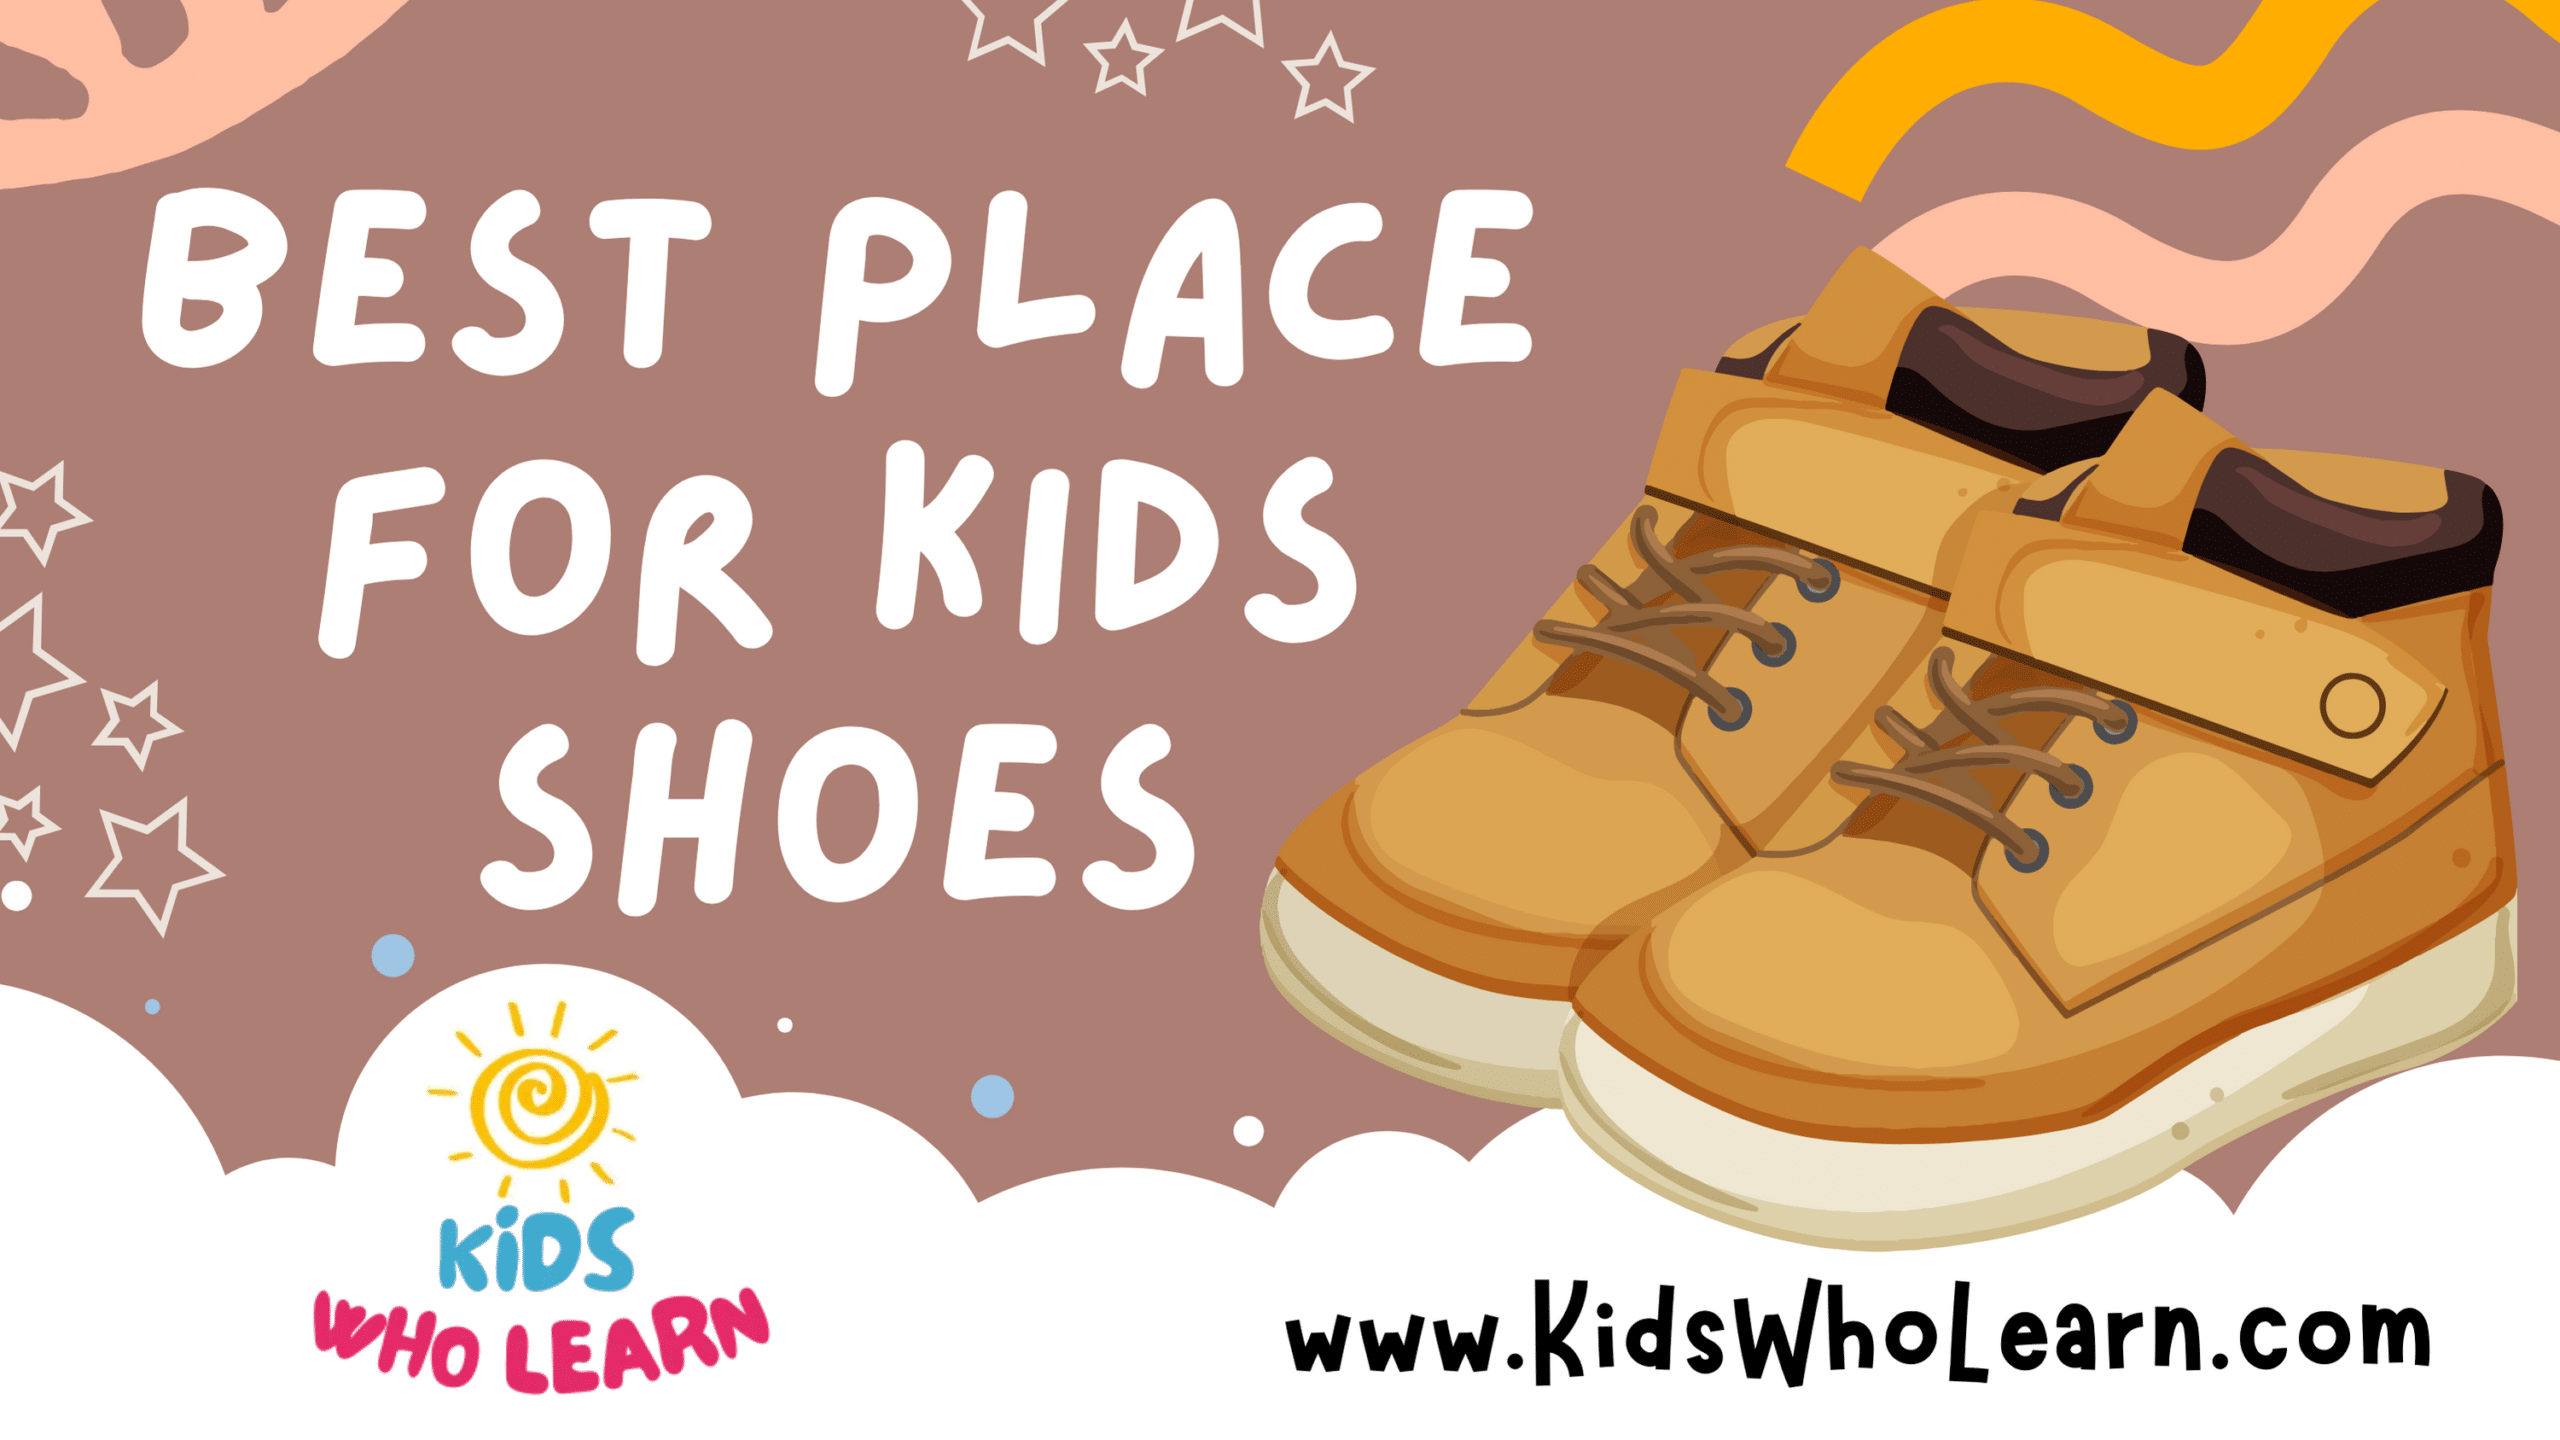 The Best Place for Kids Shoes: Finding Quality and Comfort